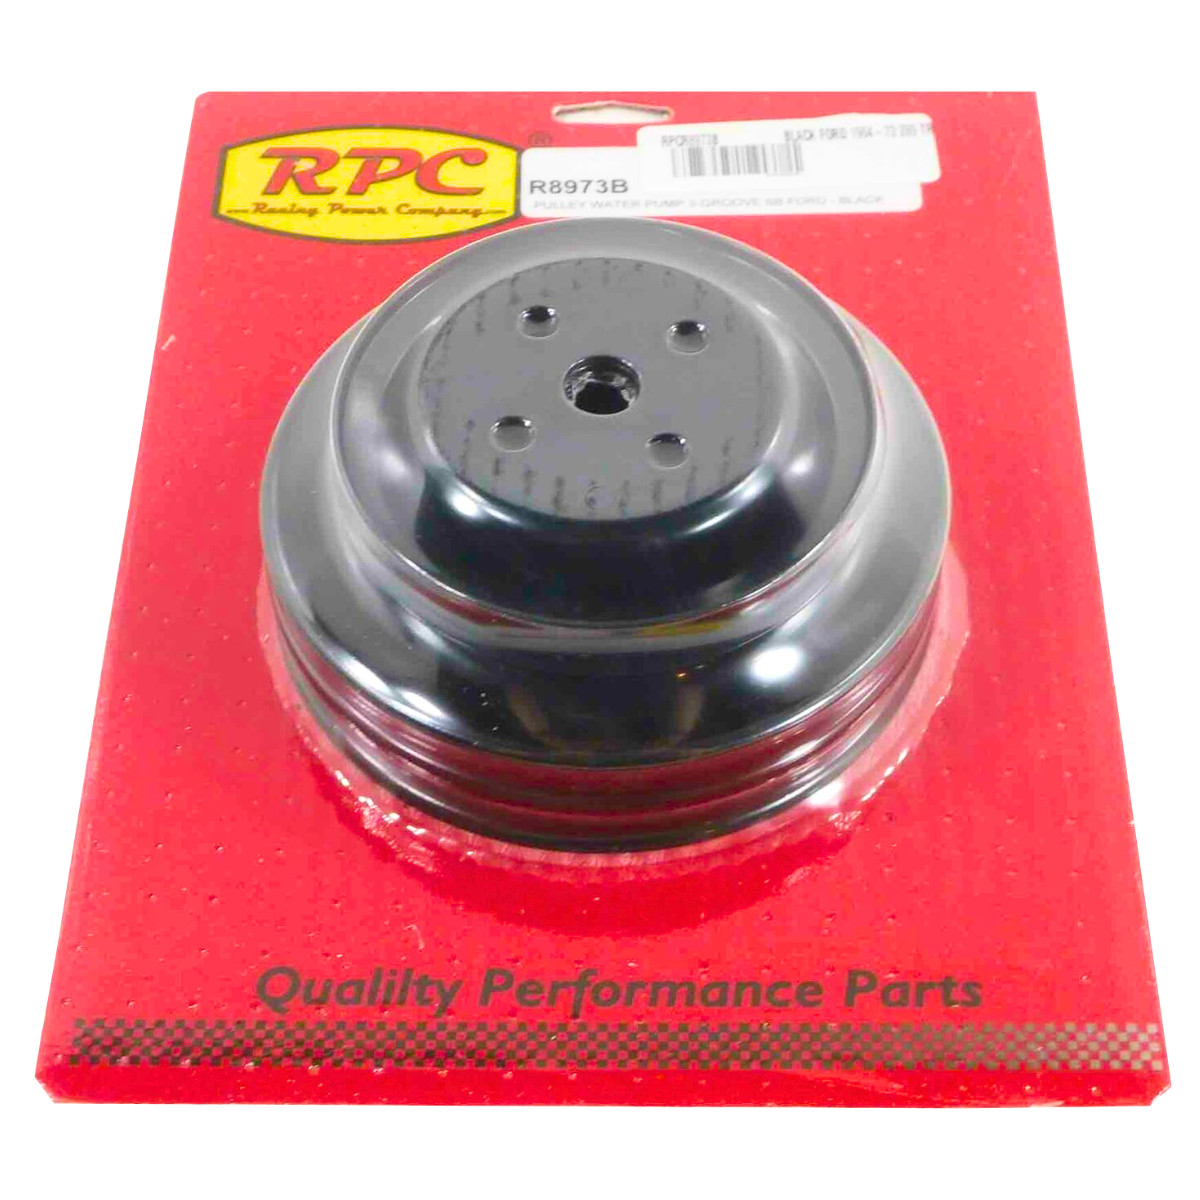 Racing Power Company R8973B Pulley water pump 3-groove sb ford - black